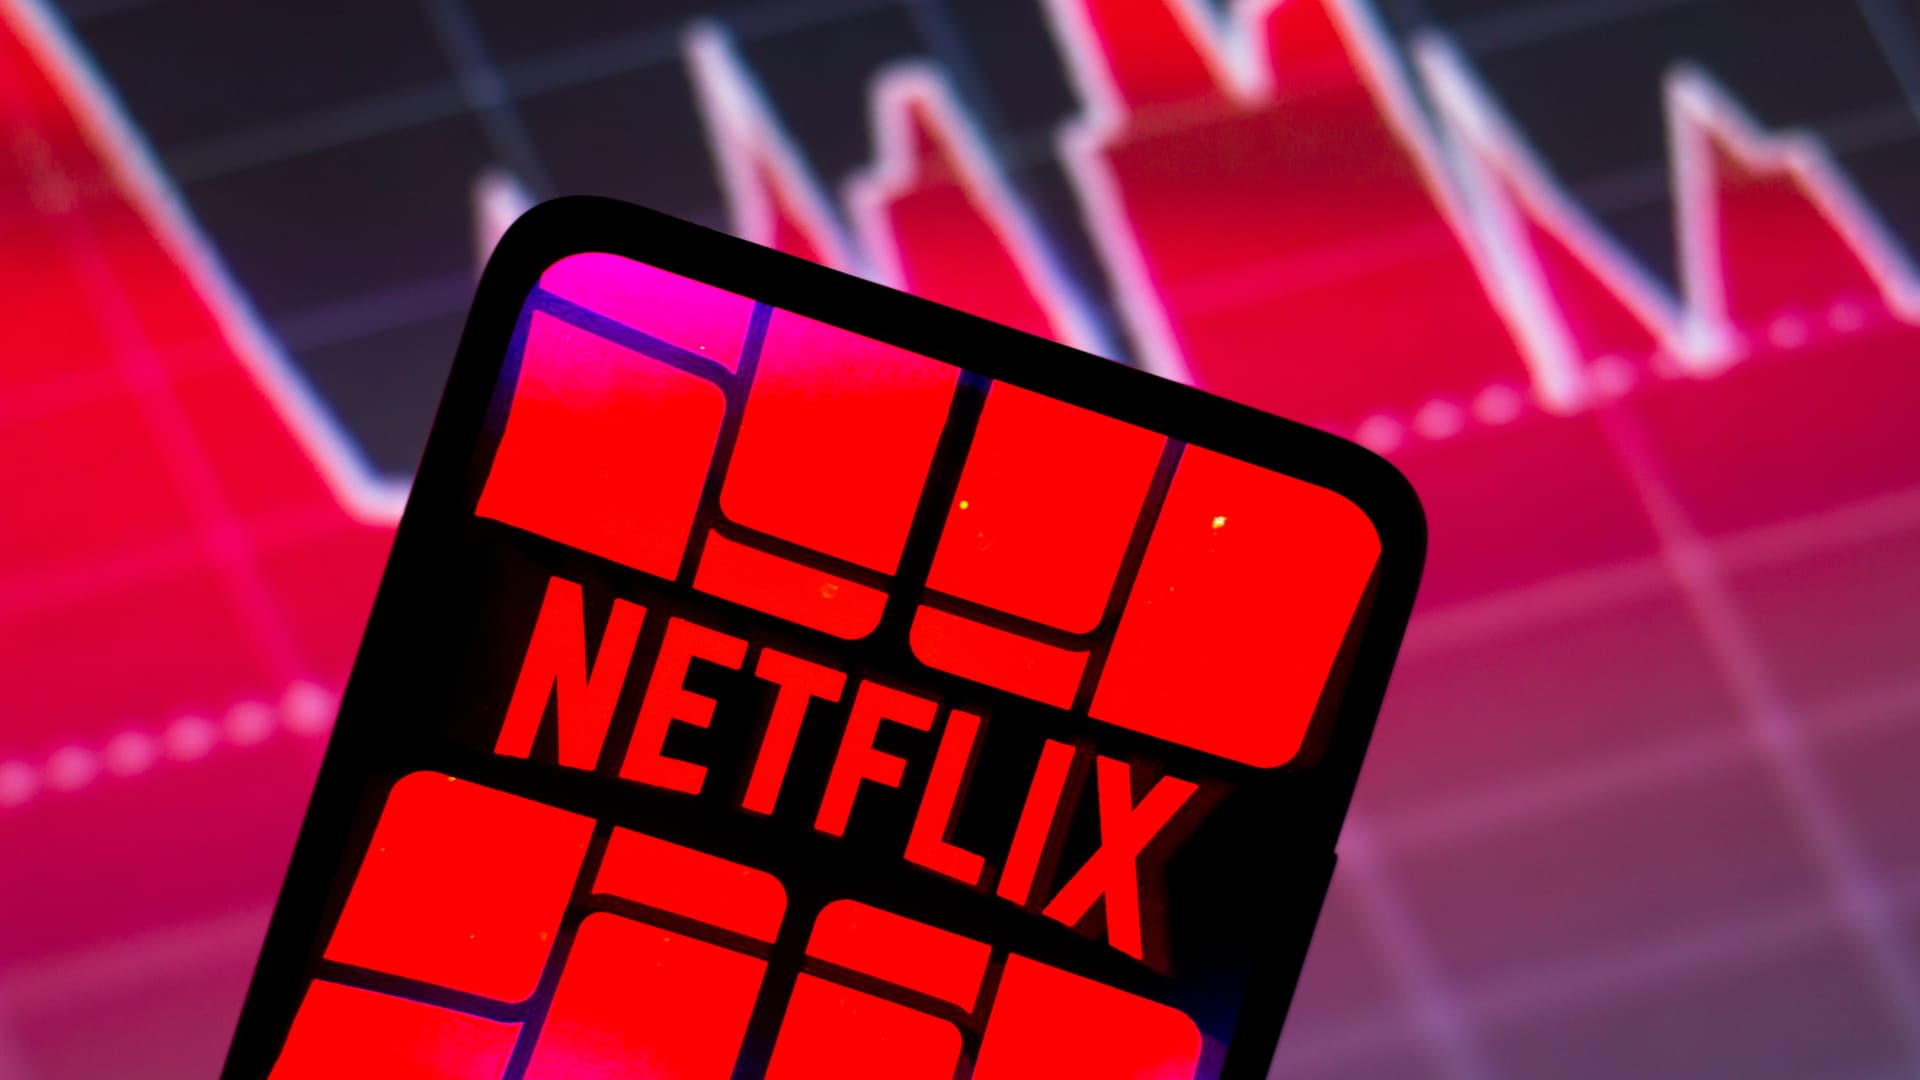 Will Netflix keep losing subscribers this year? Investors are eager for guidance – CNBC